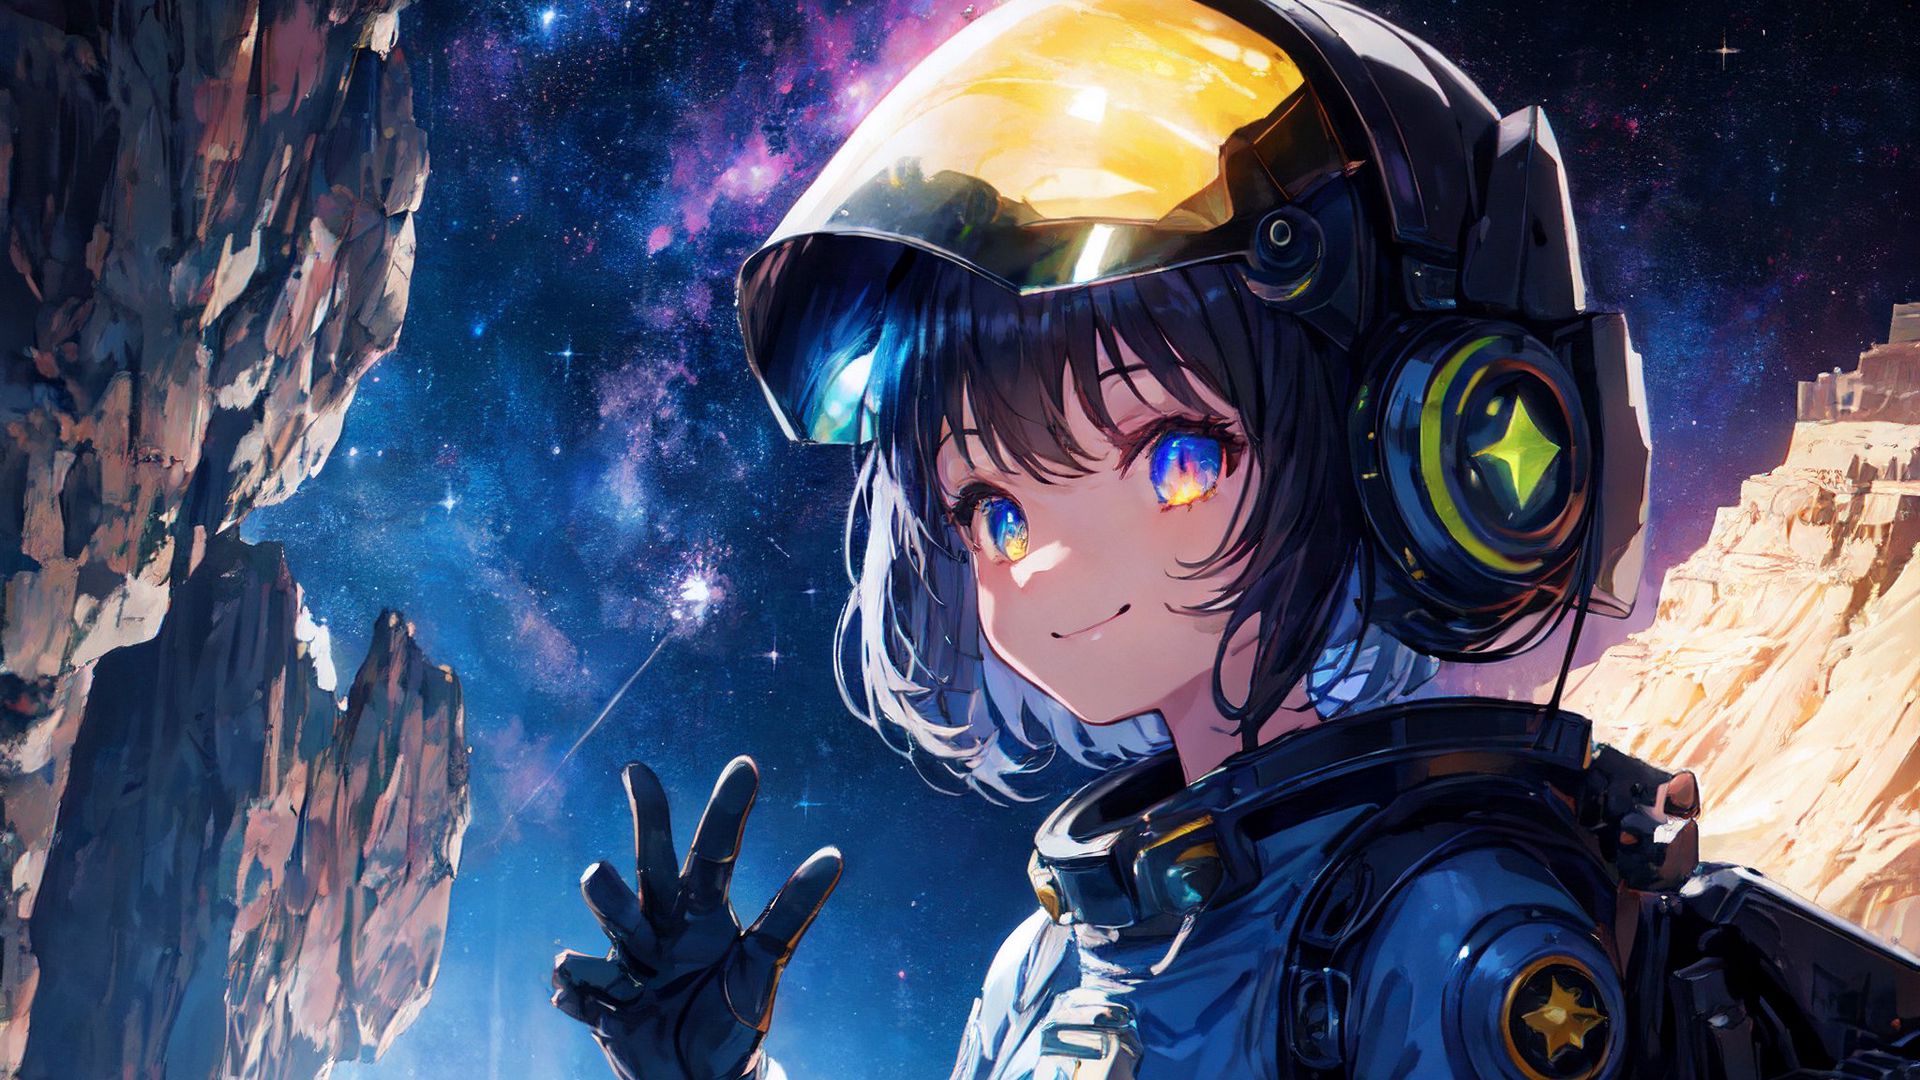 Download wallpaper 1920x1080 girl, smile, astronaut, anime full hd, hdtv, fhd, 1080p HD background